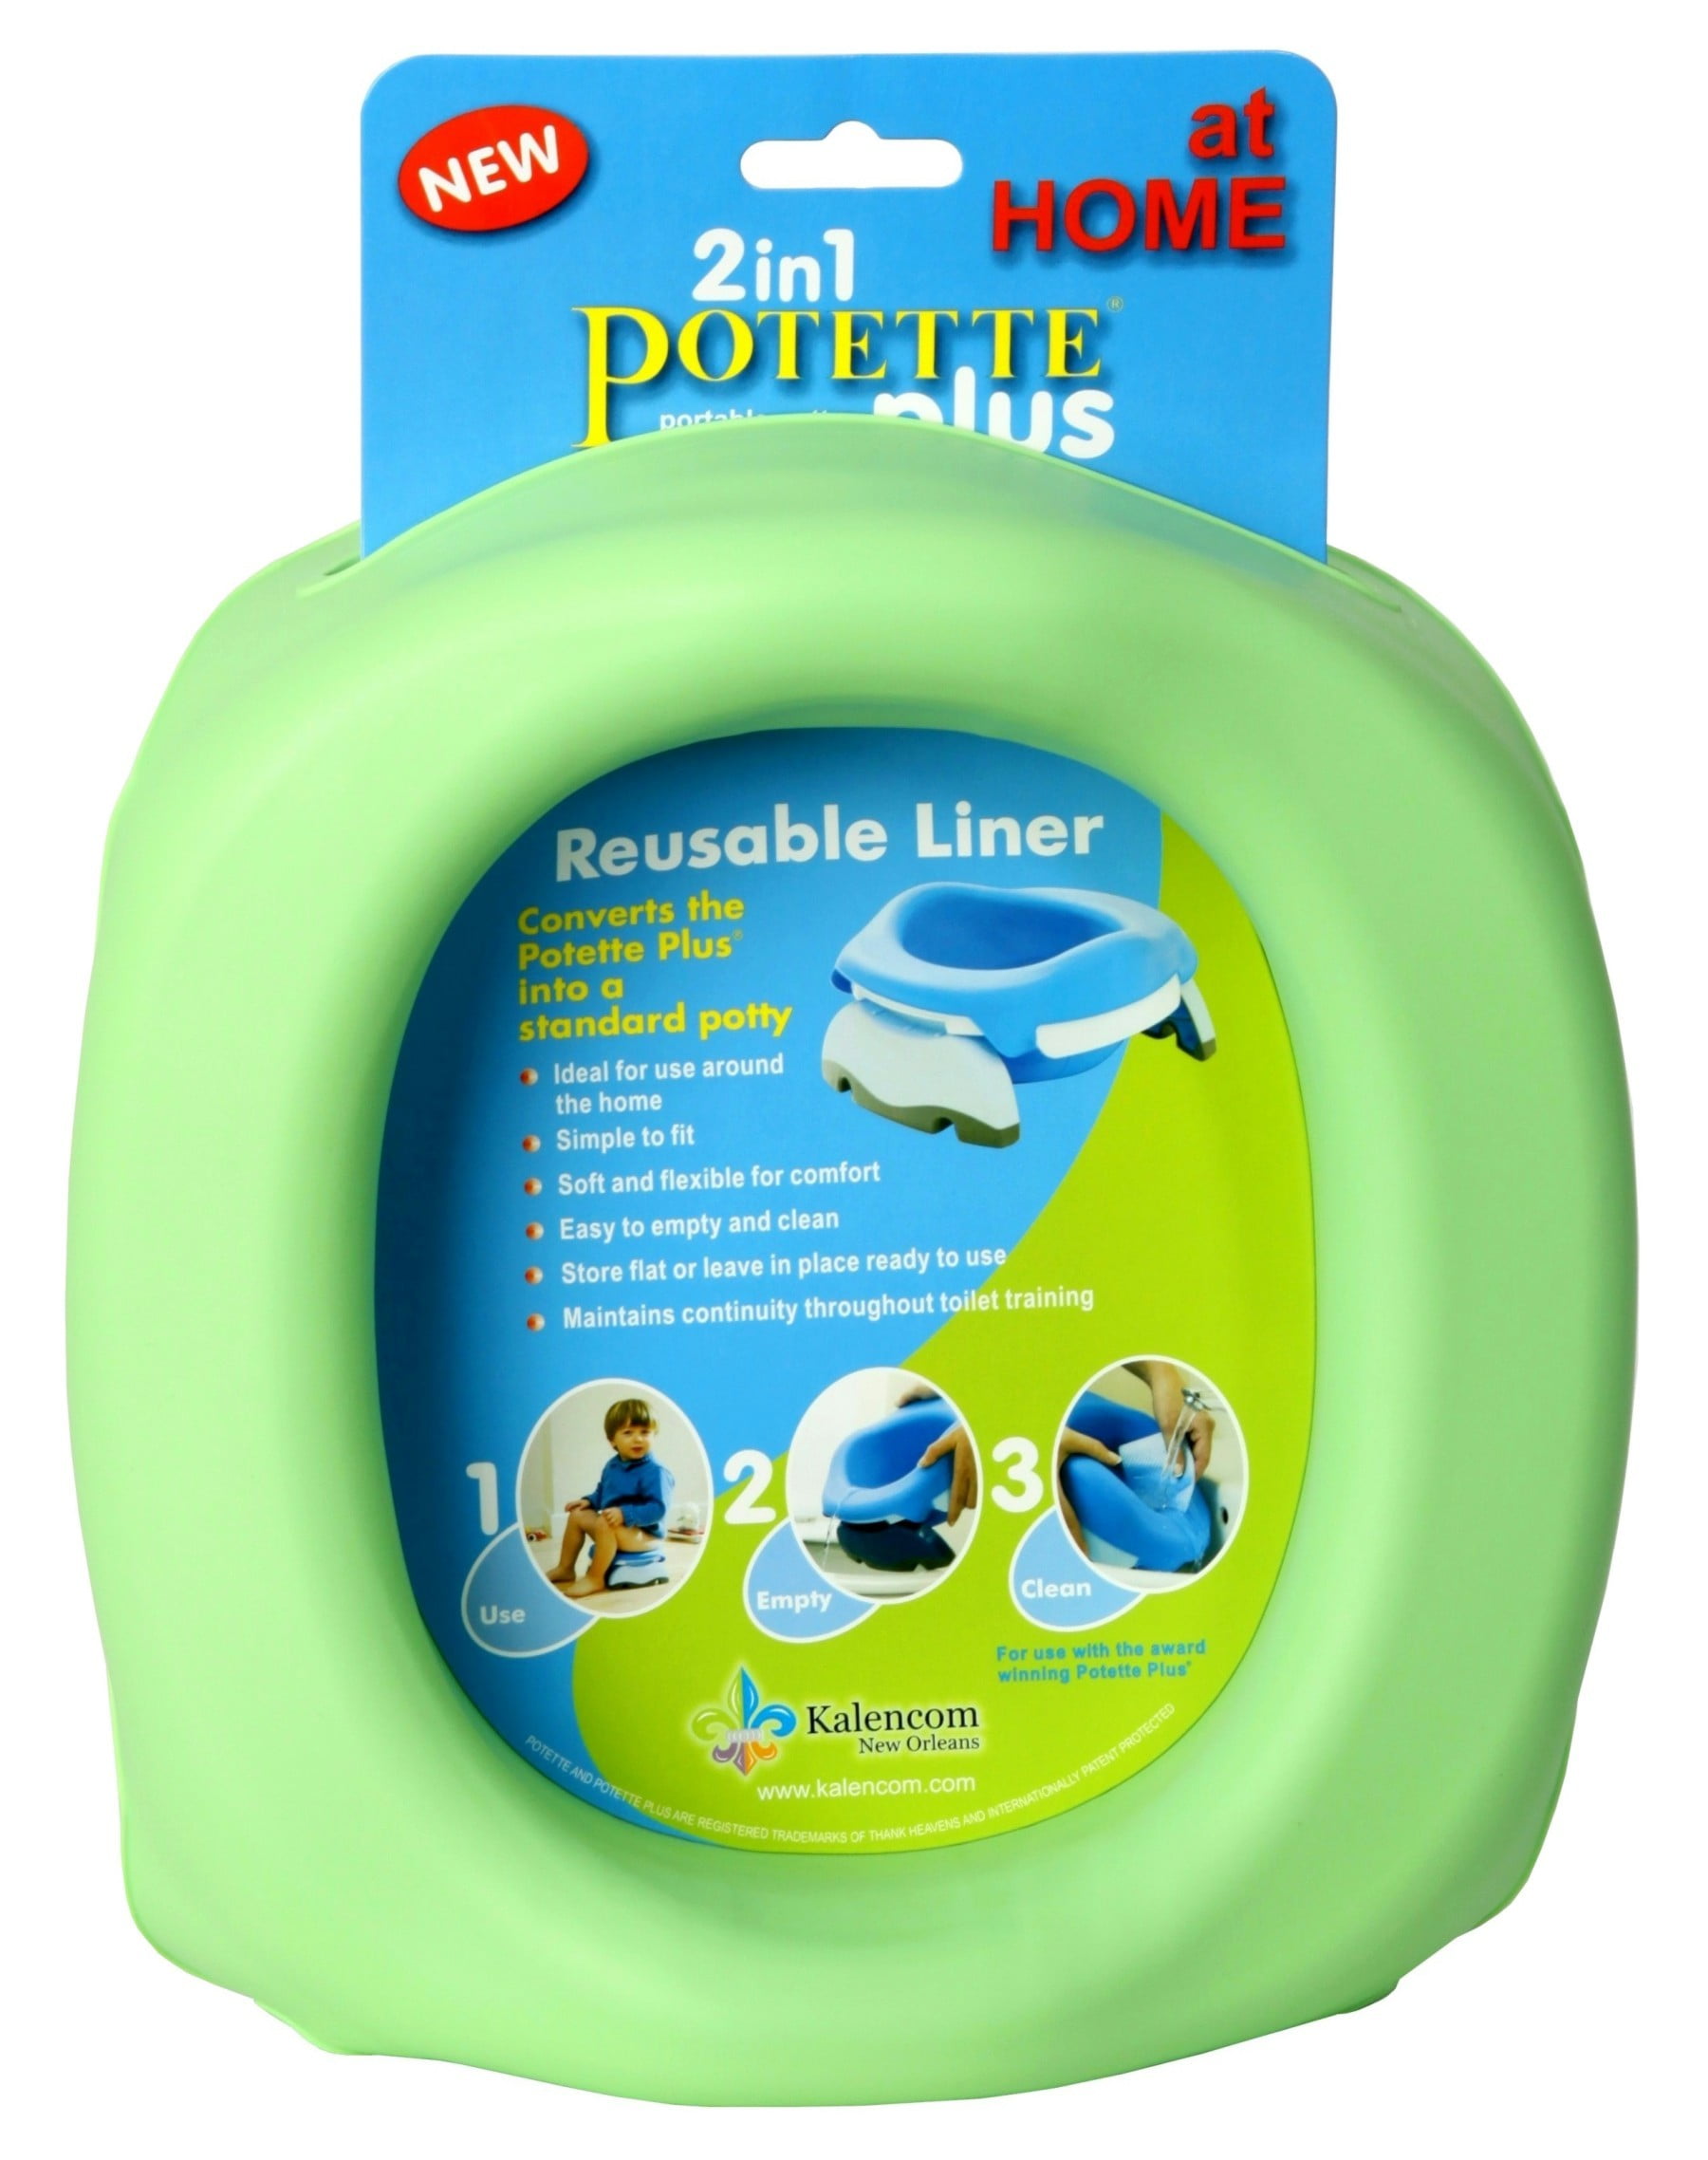 Potette Plus At Home Training Potty Reusable Liners - Green